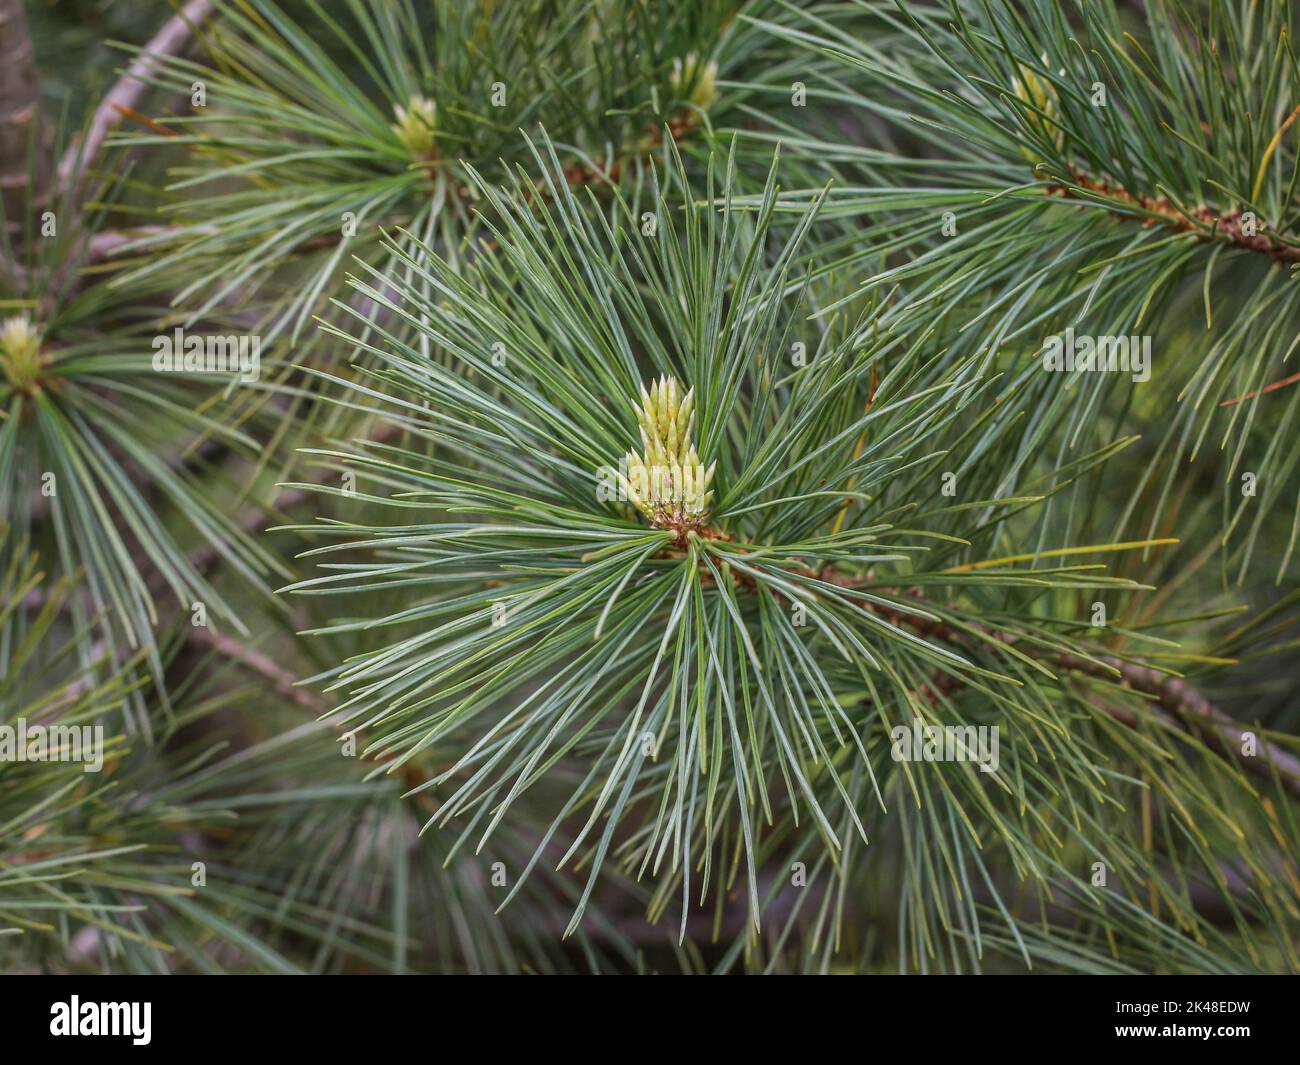 Young shoot on the branch of Macedonian pine (latin name: Pinus peuce) in southwestern Serbia Stock Photo